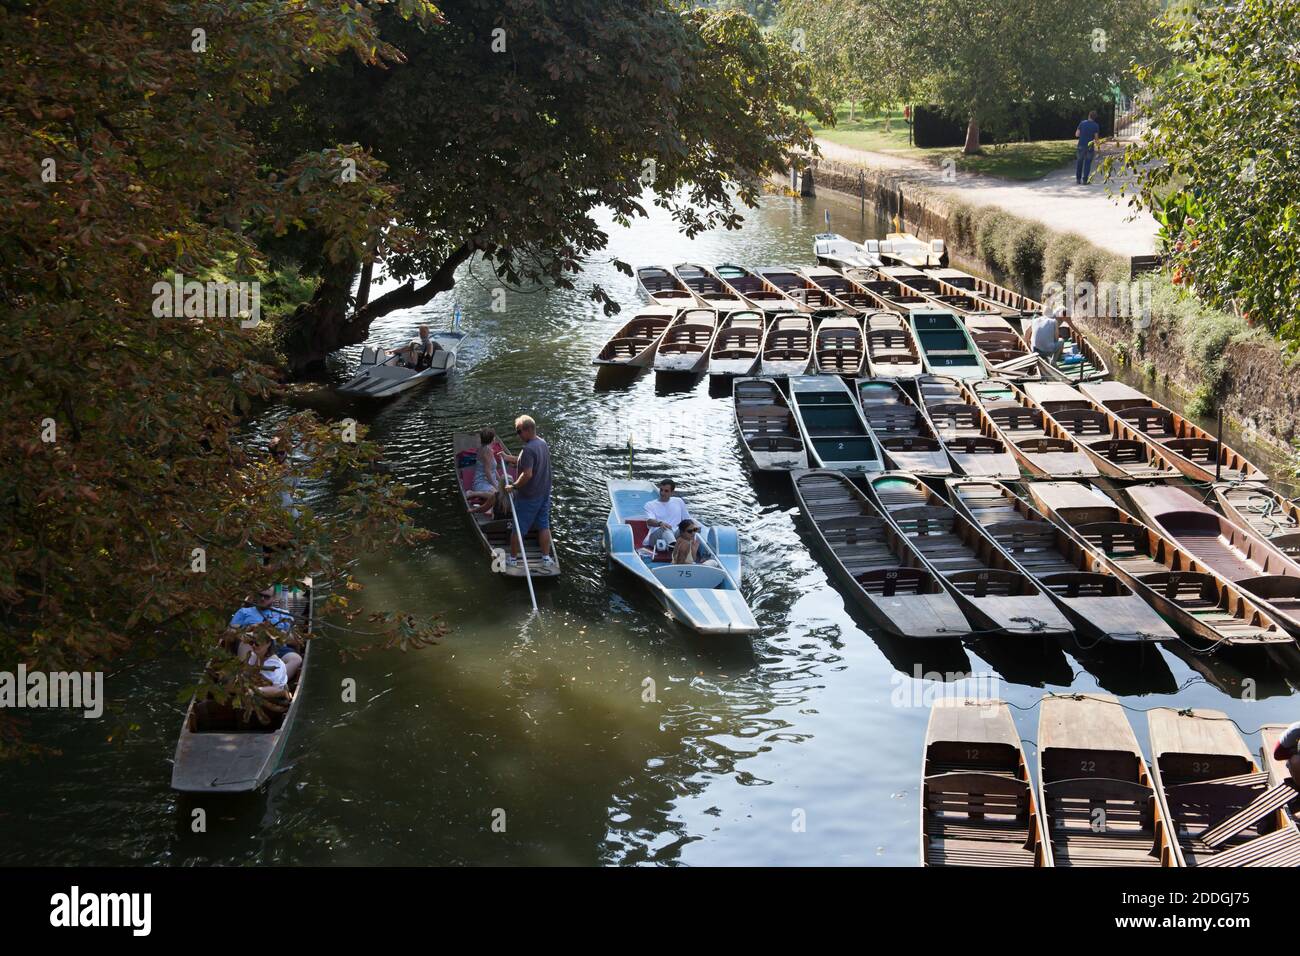 People punting on The River Cherwell in Oxford by Magdalen Bridge in the UK, taken on the 15th of September 2020 Stock Photo